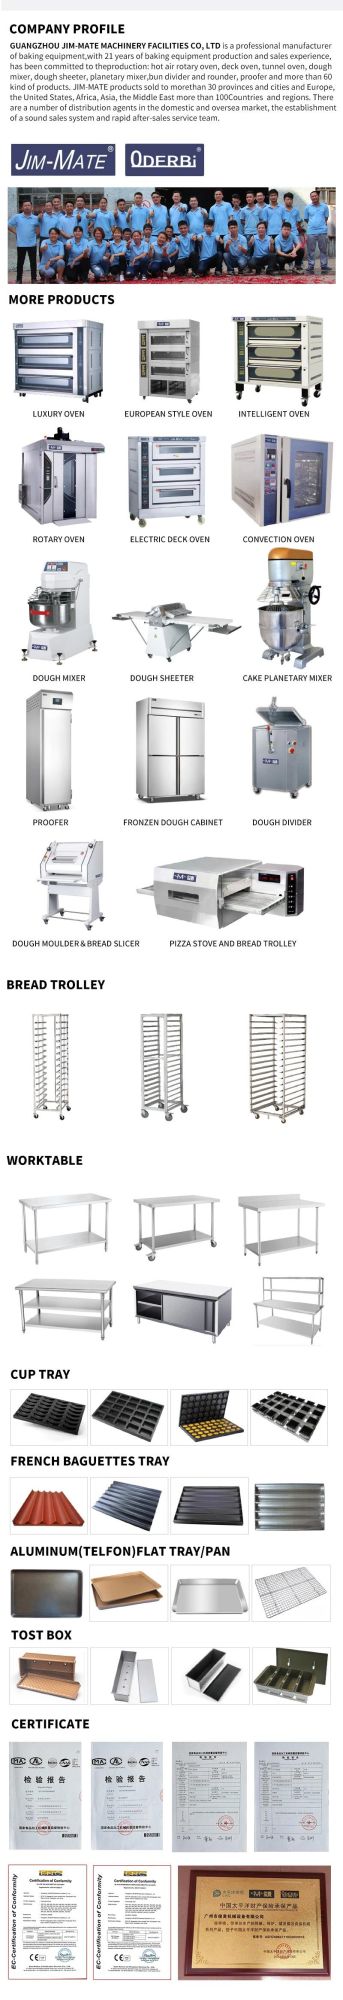 3 Decks 6 Trays Bakery Equipment Commercial Electric Deck Cake Bread Baking Pizza Oven